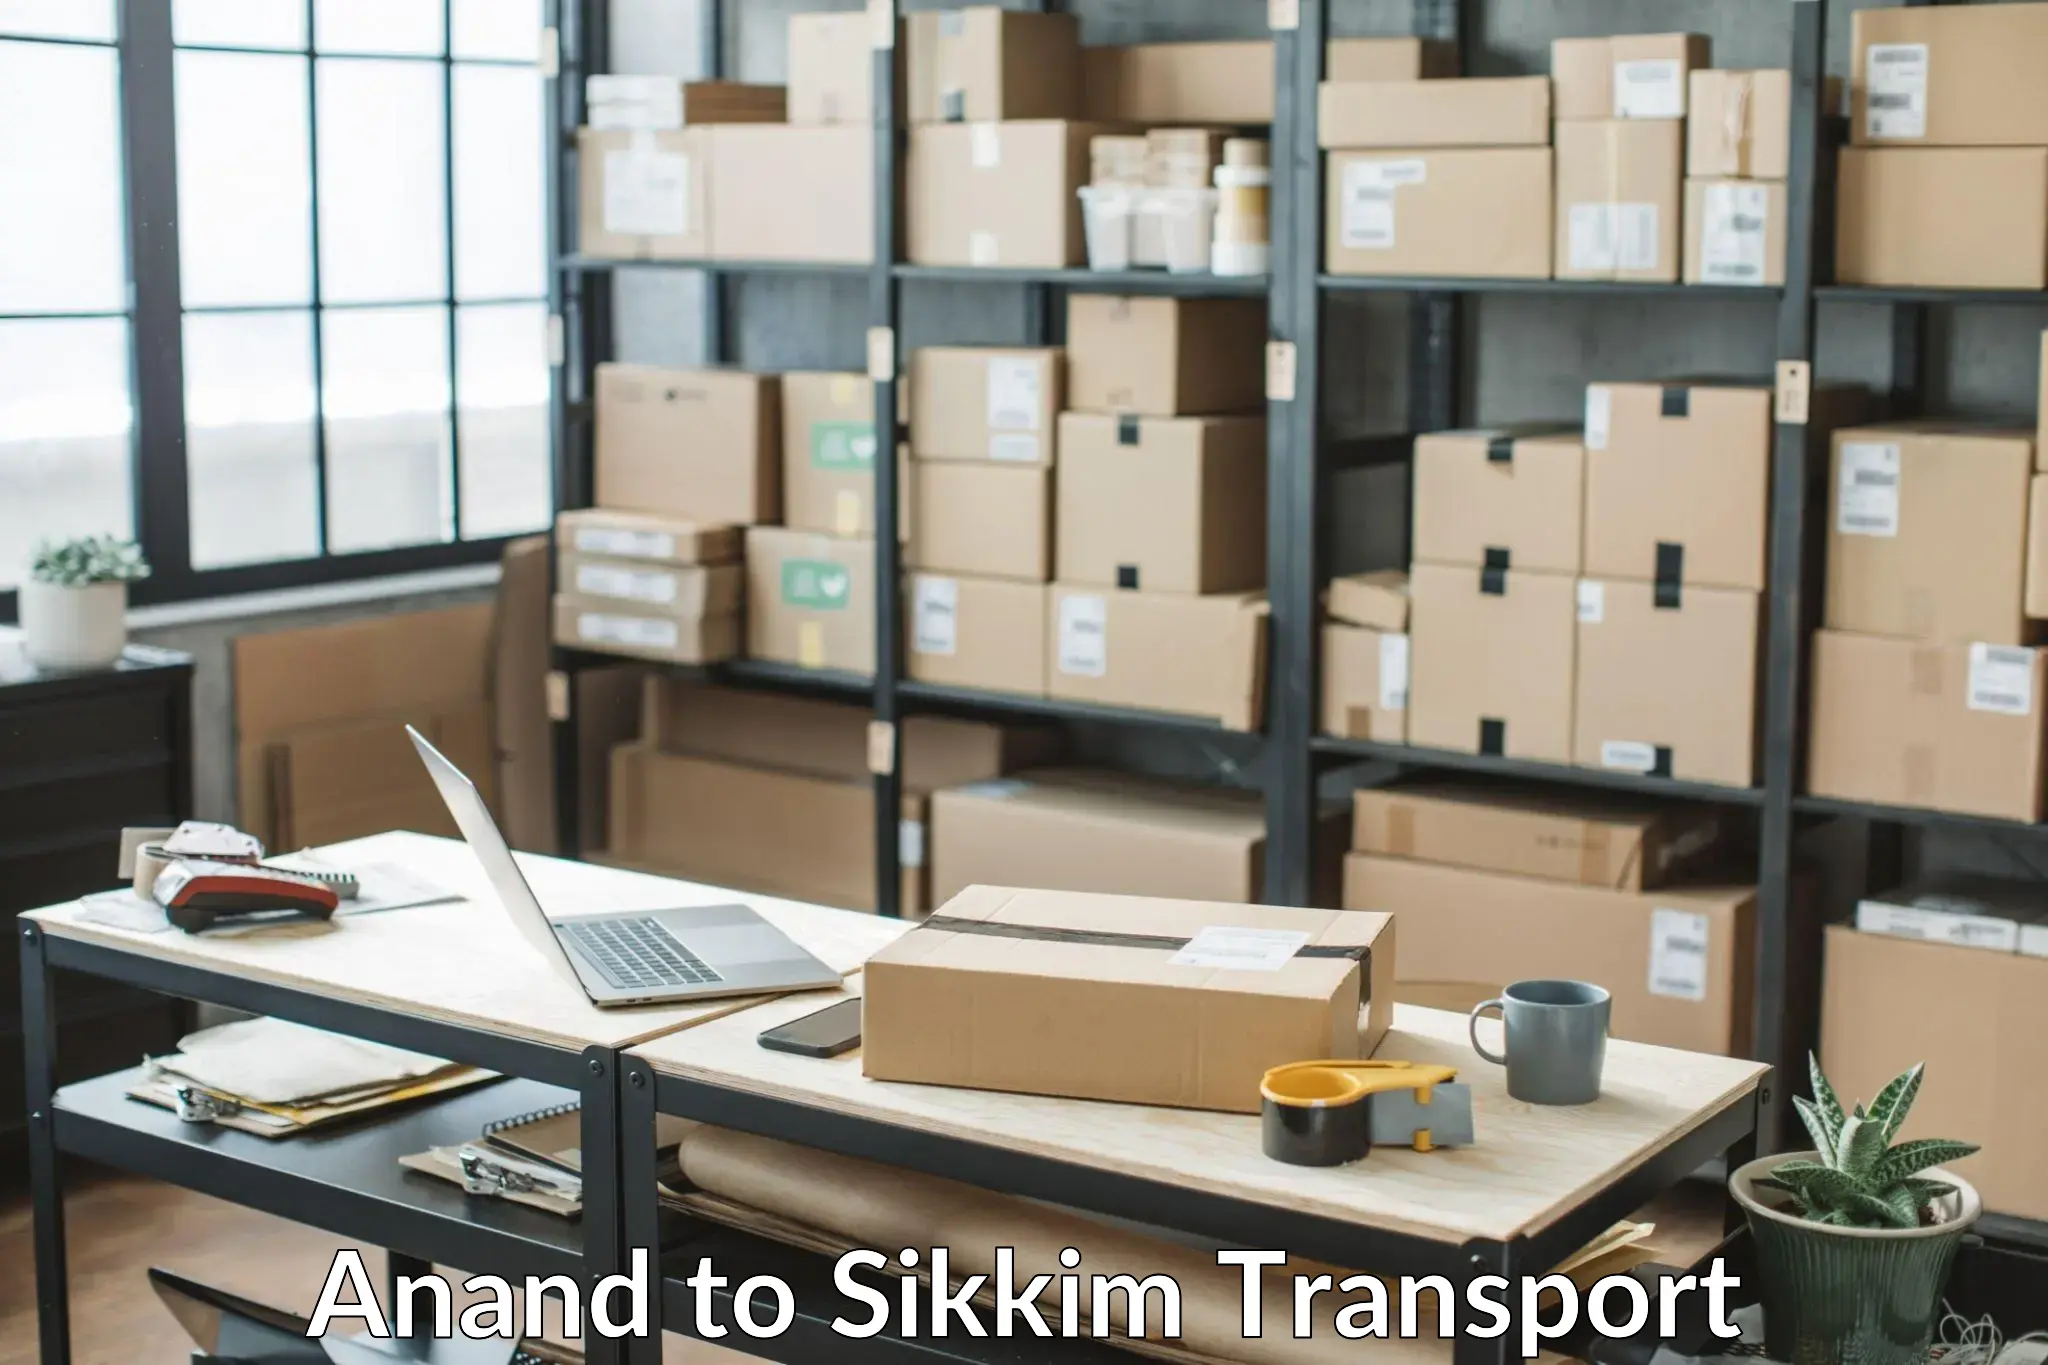 Lorry transport service Anand to Sikkim